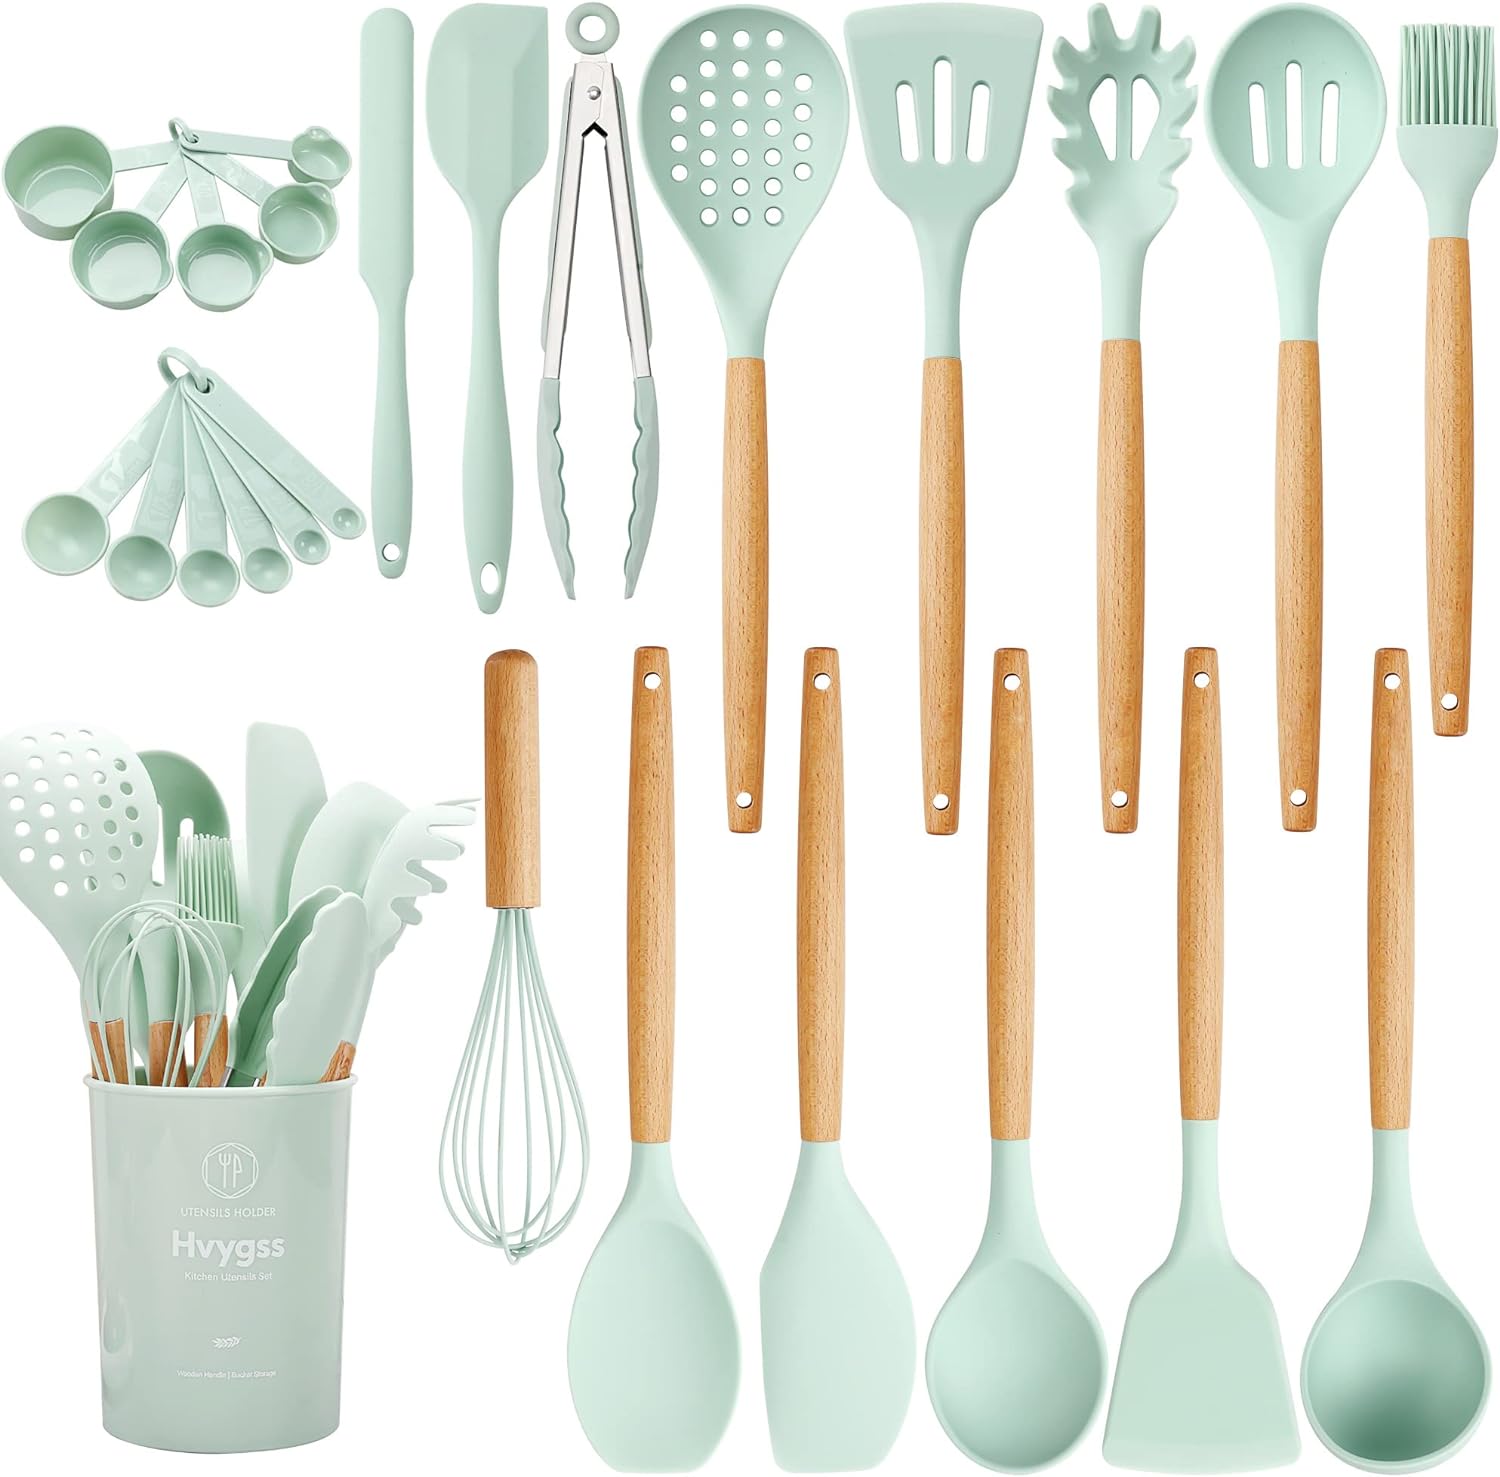 Hvygss Kitchen Utensils Set, 26 Pcs Silicone Cooking Utensils Set Wooden Handle Heat Resistant with Utensil Holder Spoons Spatulas for Nonstick Cookware for House Warming Gifts New Home (Green)